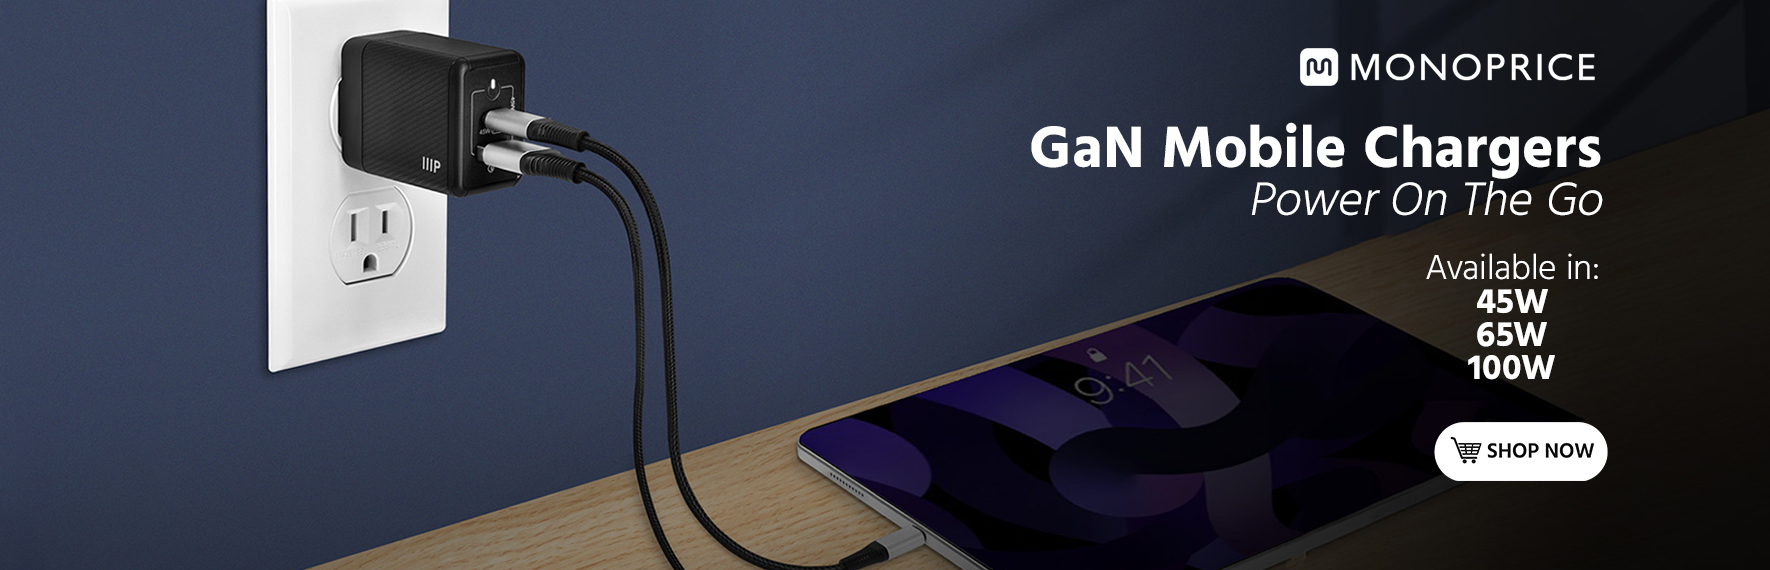 GaN Mobile Chargers Power On The Go Available in: 45W 65W 100W Shop Now